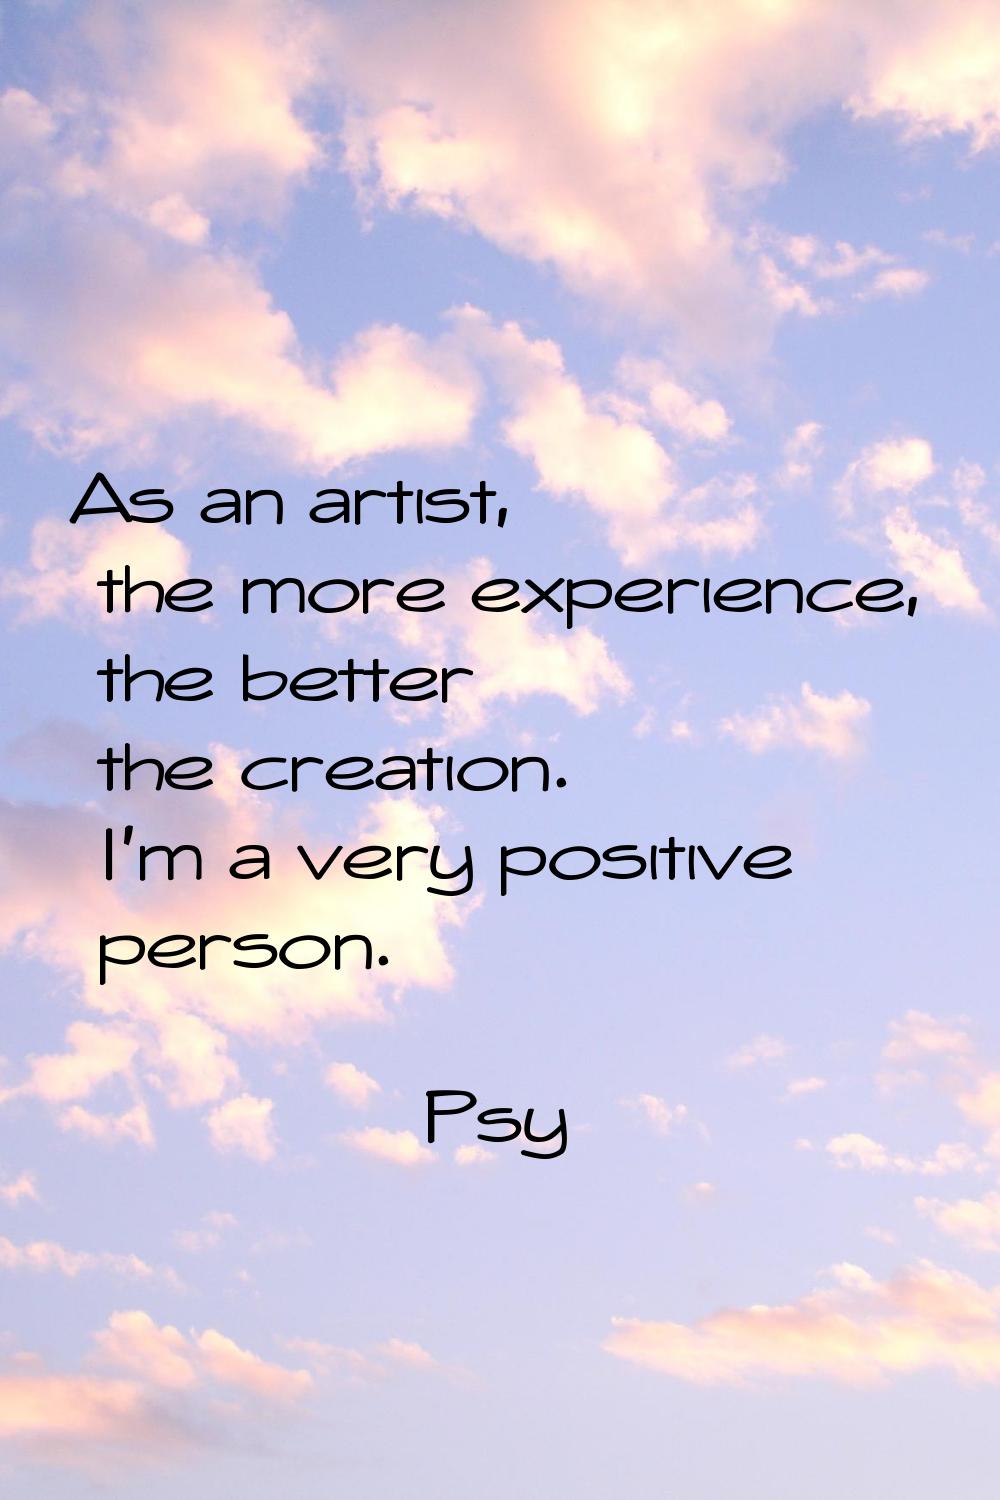 As an artist, the more experience, the better the creation. I'm a very positive person.